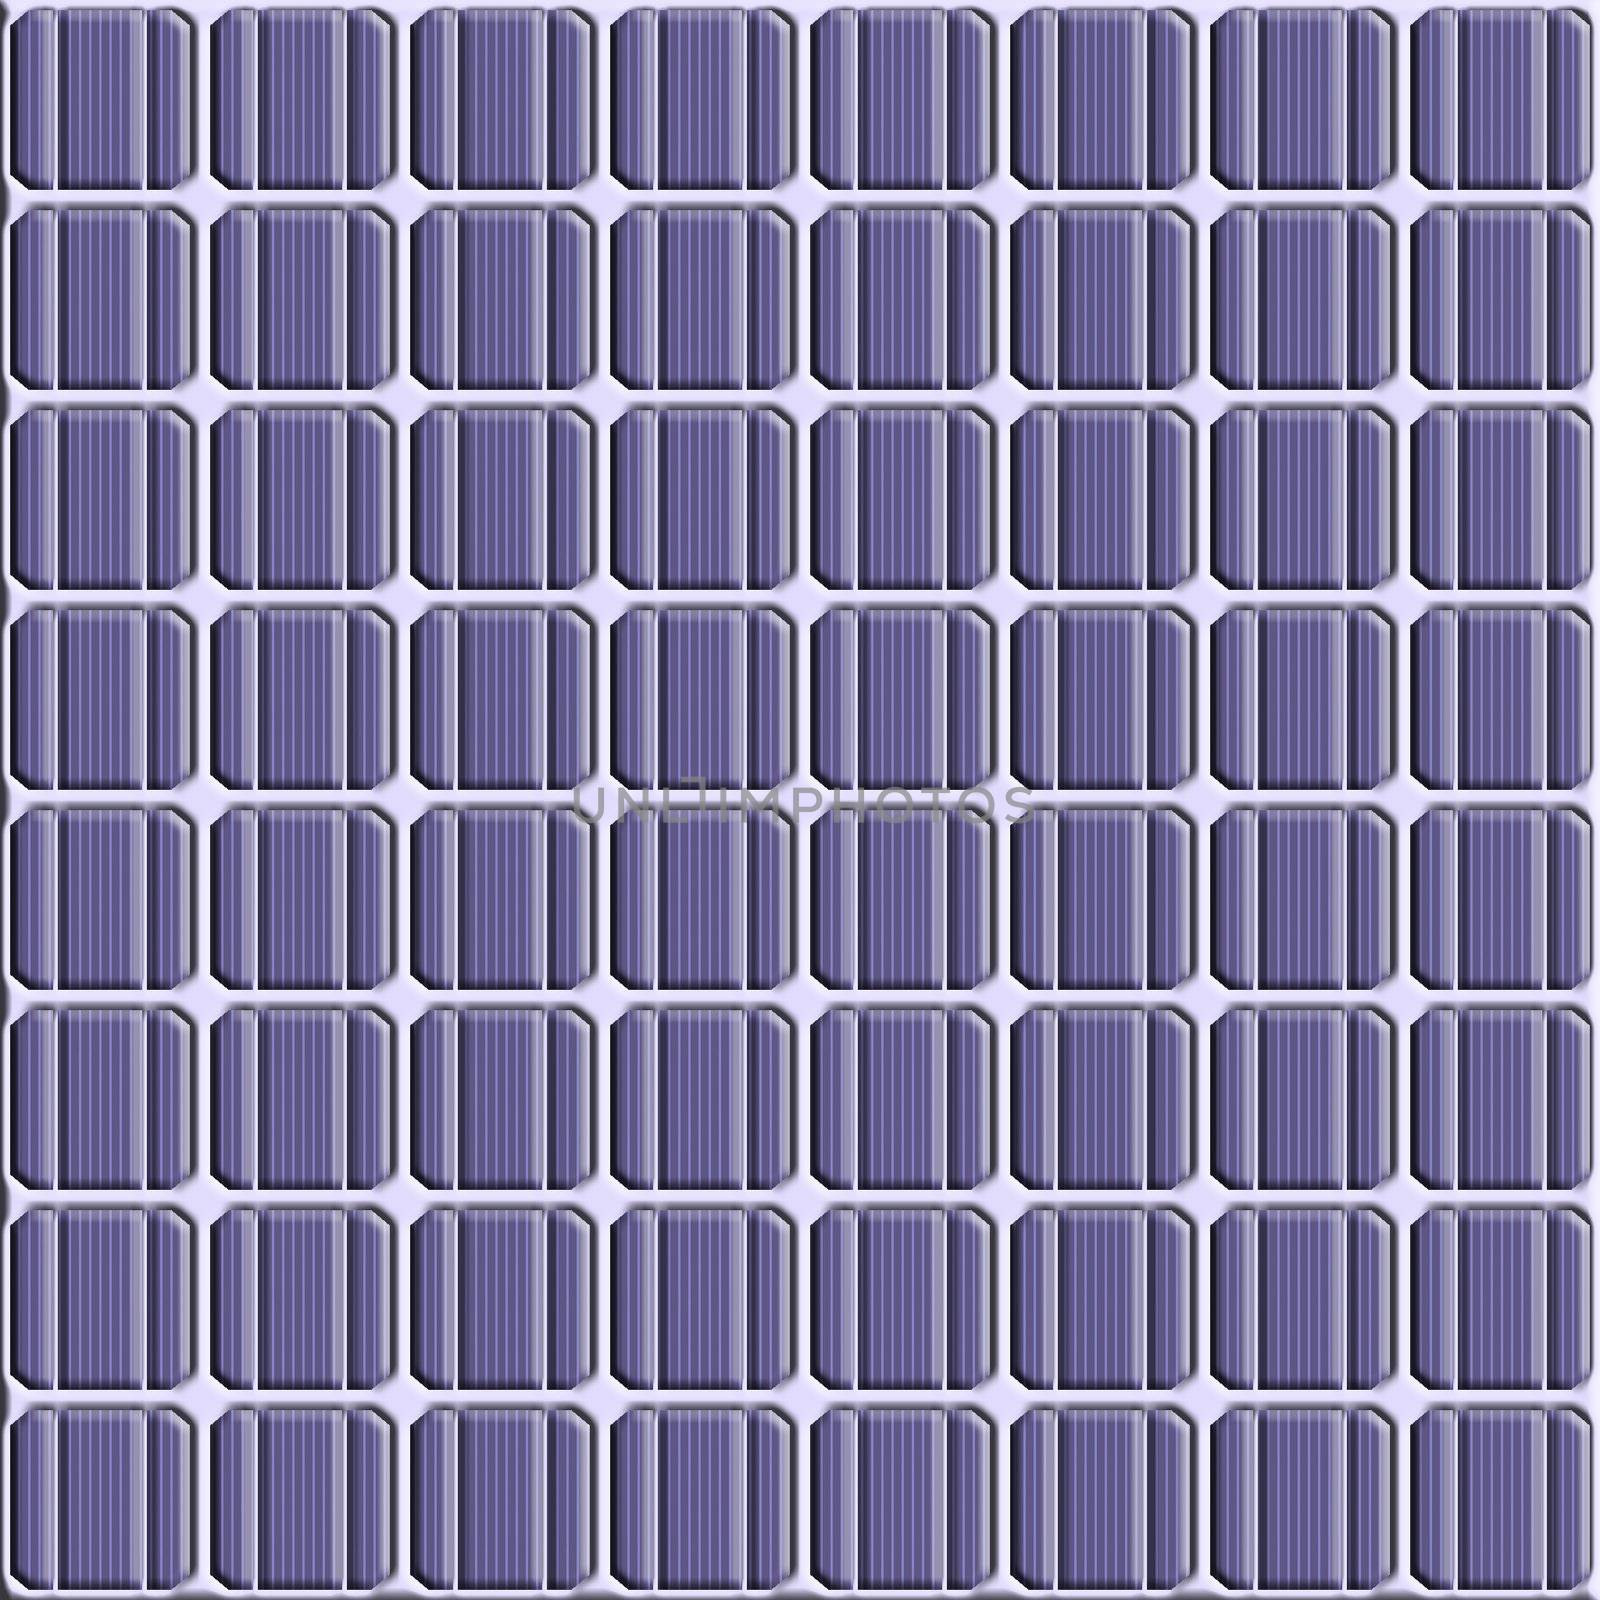 illustration of a solar cell texture pattern